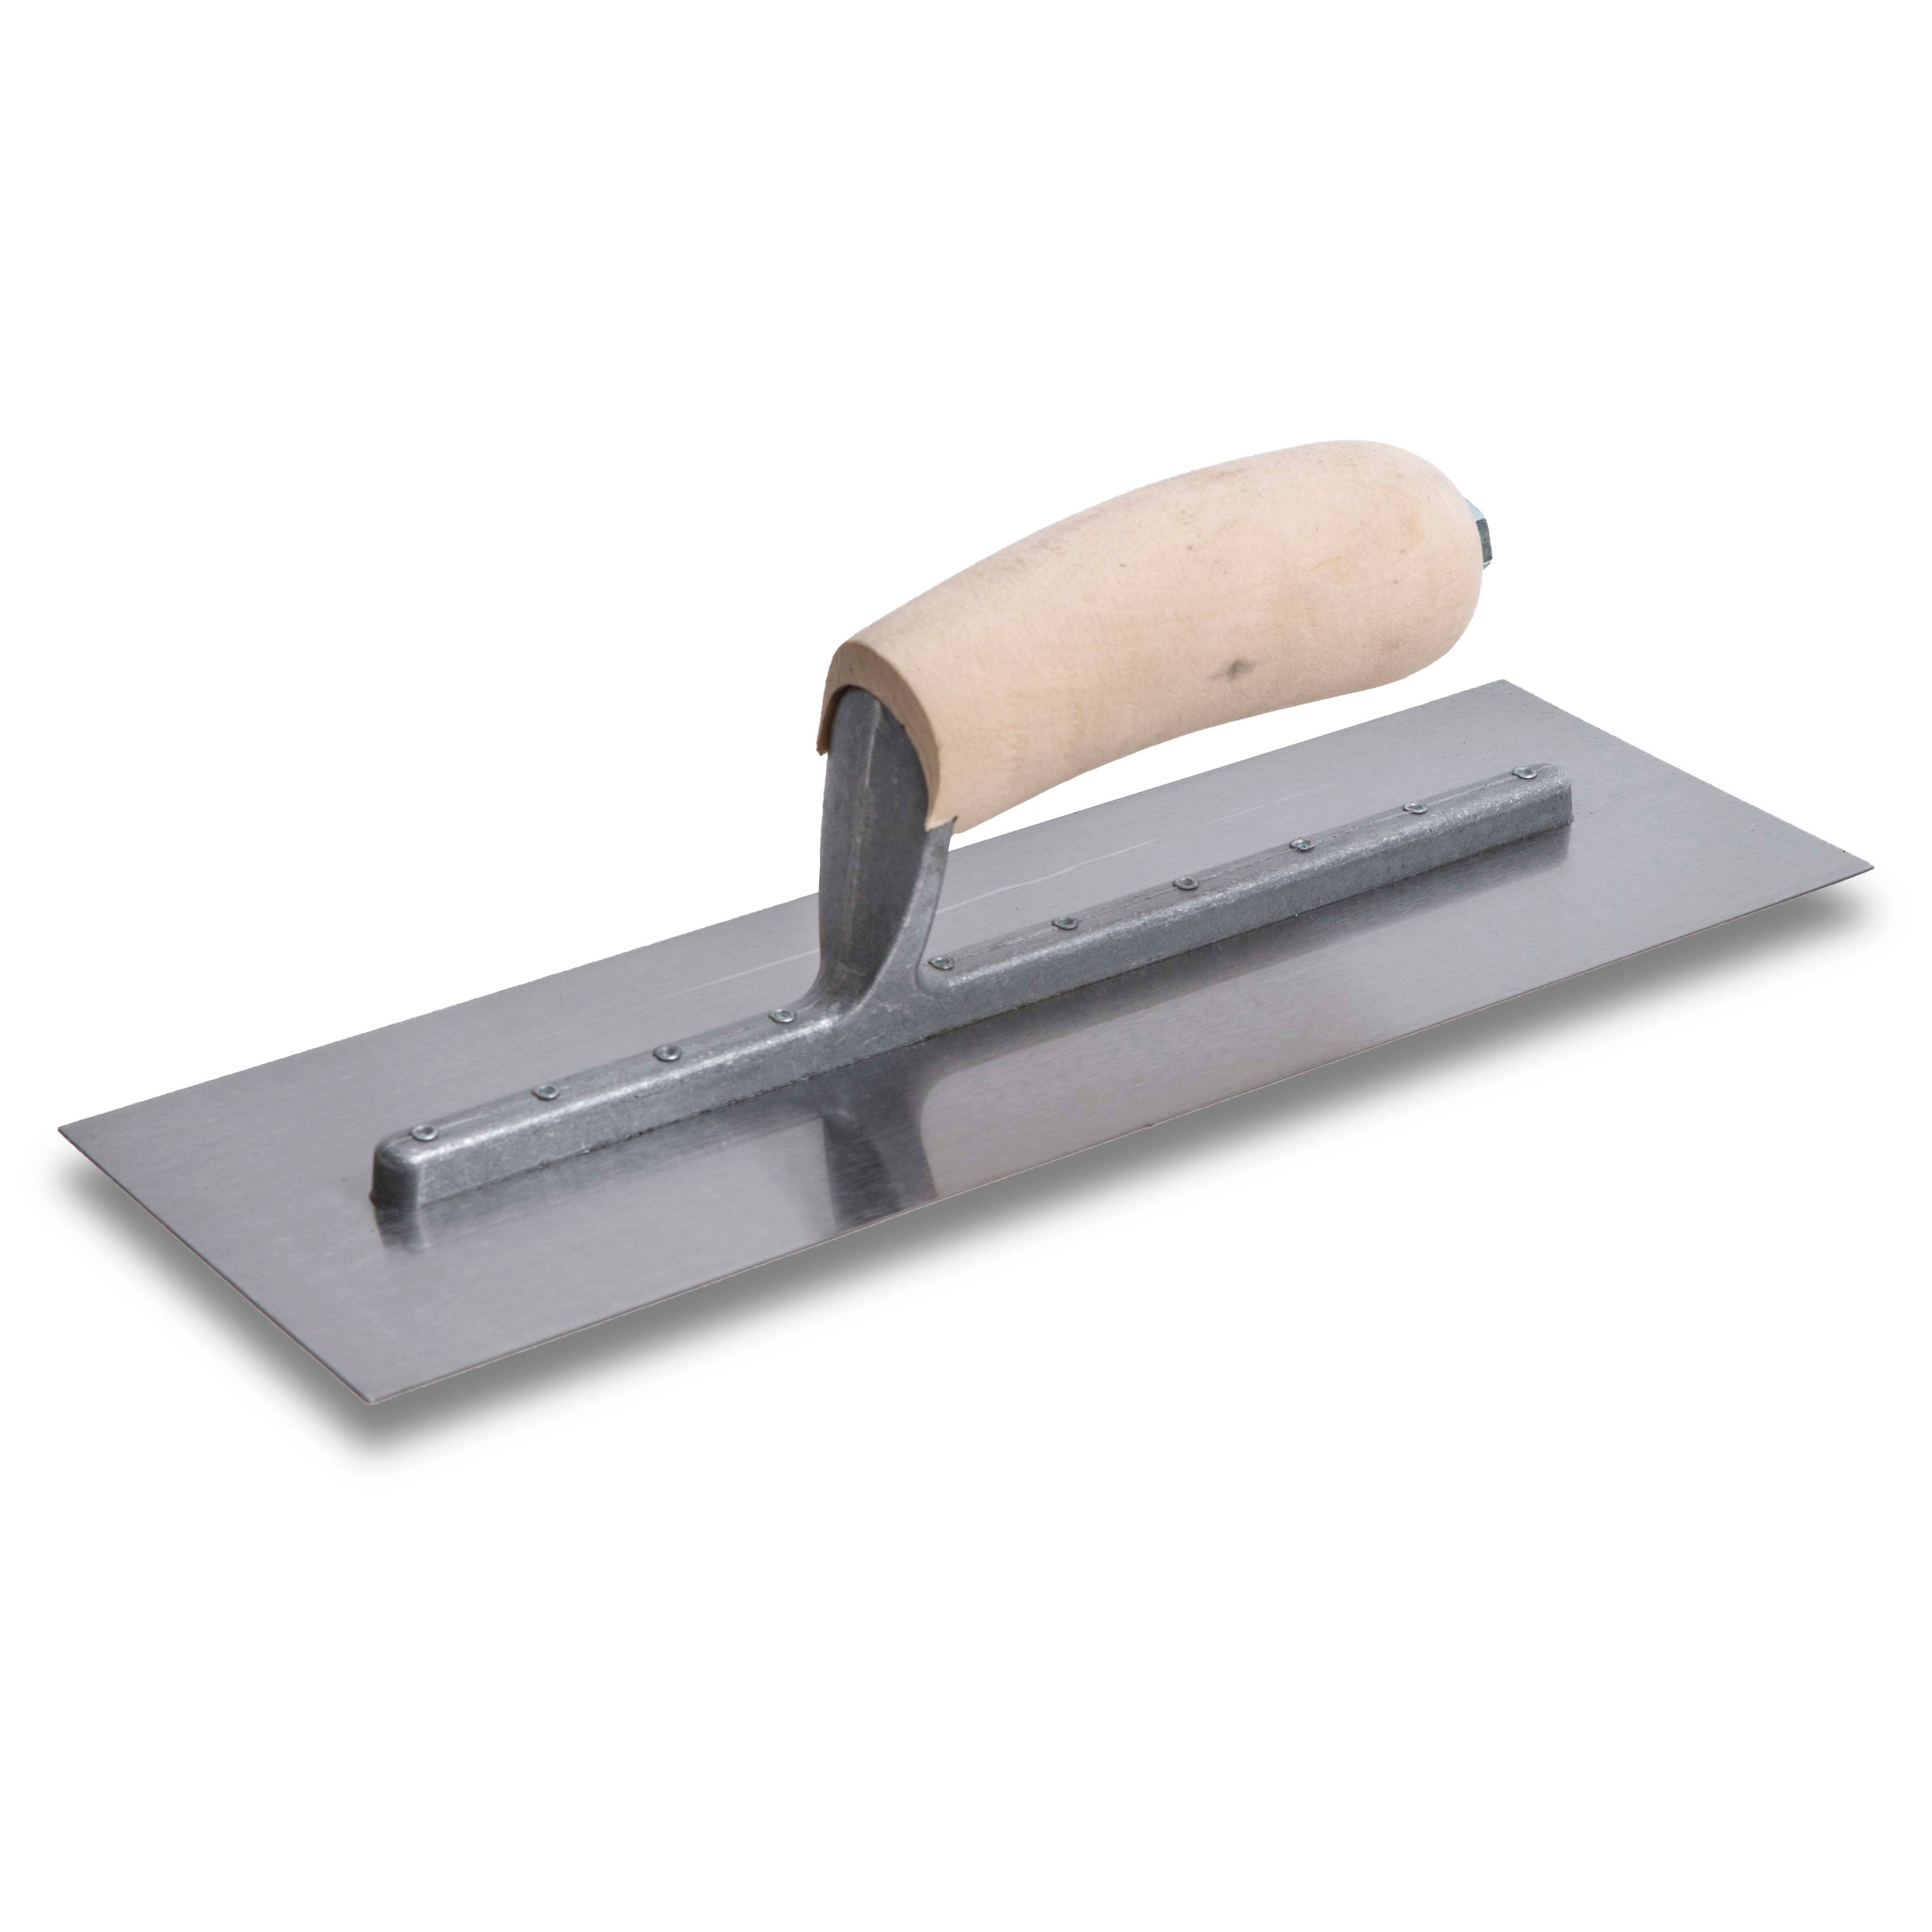 Marshalltown 13514 20" X 4" Rounded End Finishing Trowel w/Curved Wood Handle 